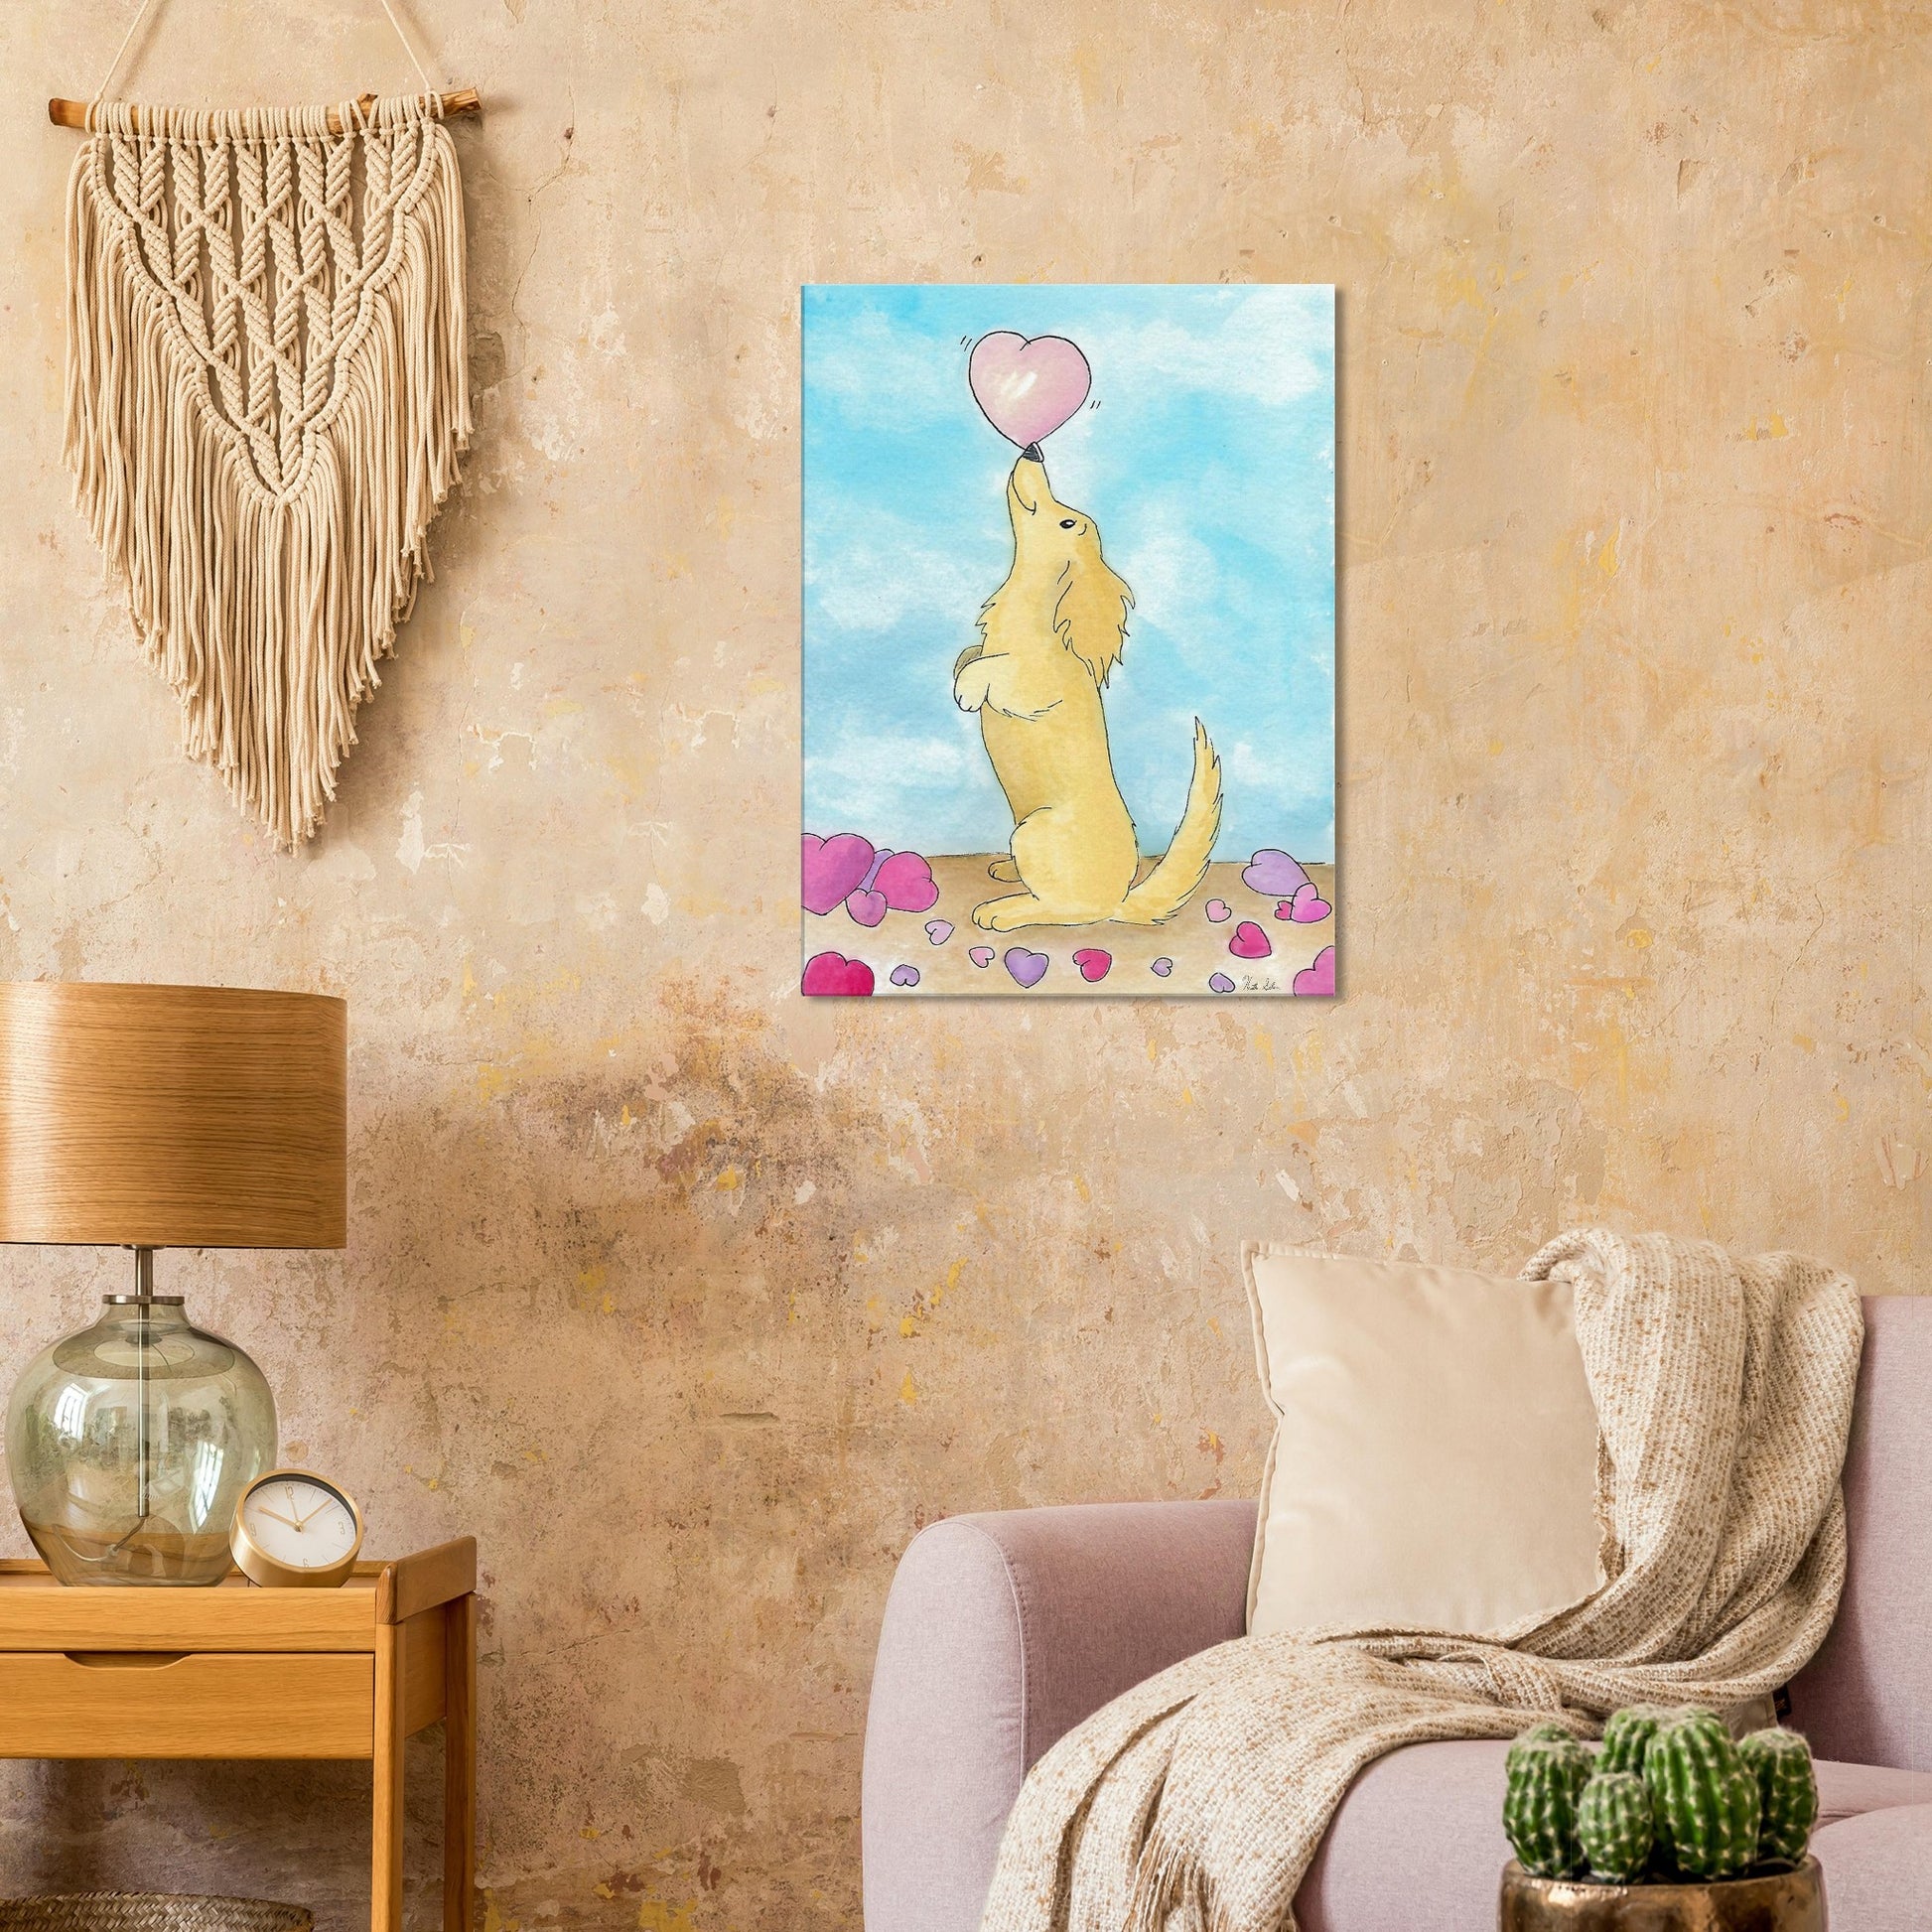 24 by 32 inch canvas wall art print of Heather Silver's watercolor painting, Puppy Love. It features a cute dog balancing a pink heart on its nose against a blue sky background. Canvas shown on beige wall by macramé above pink sofa and wooden end table with lamp.